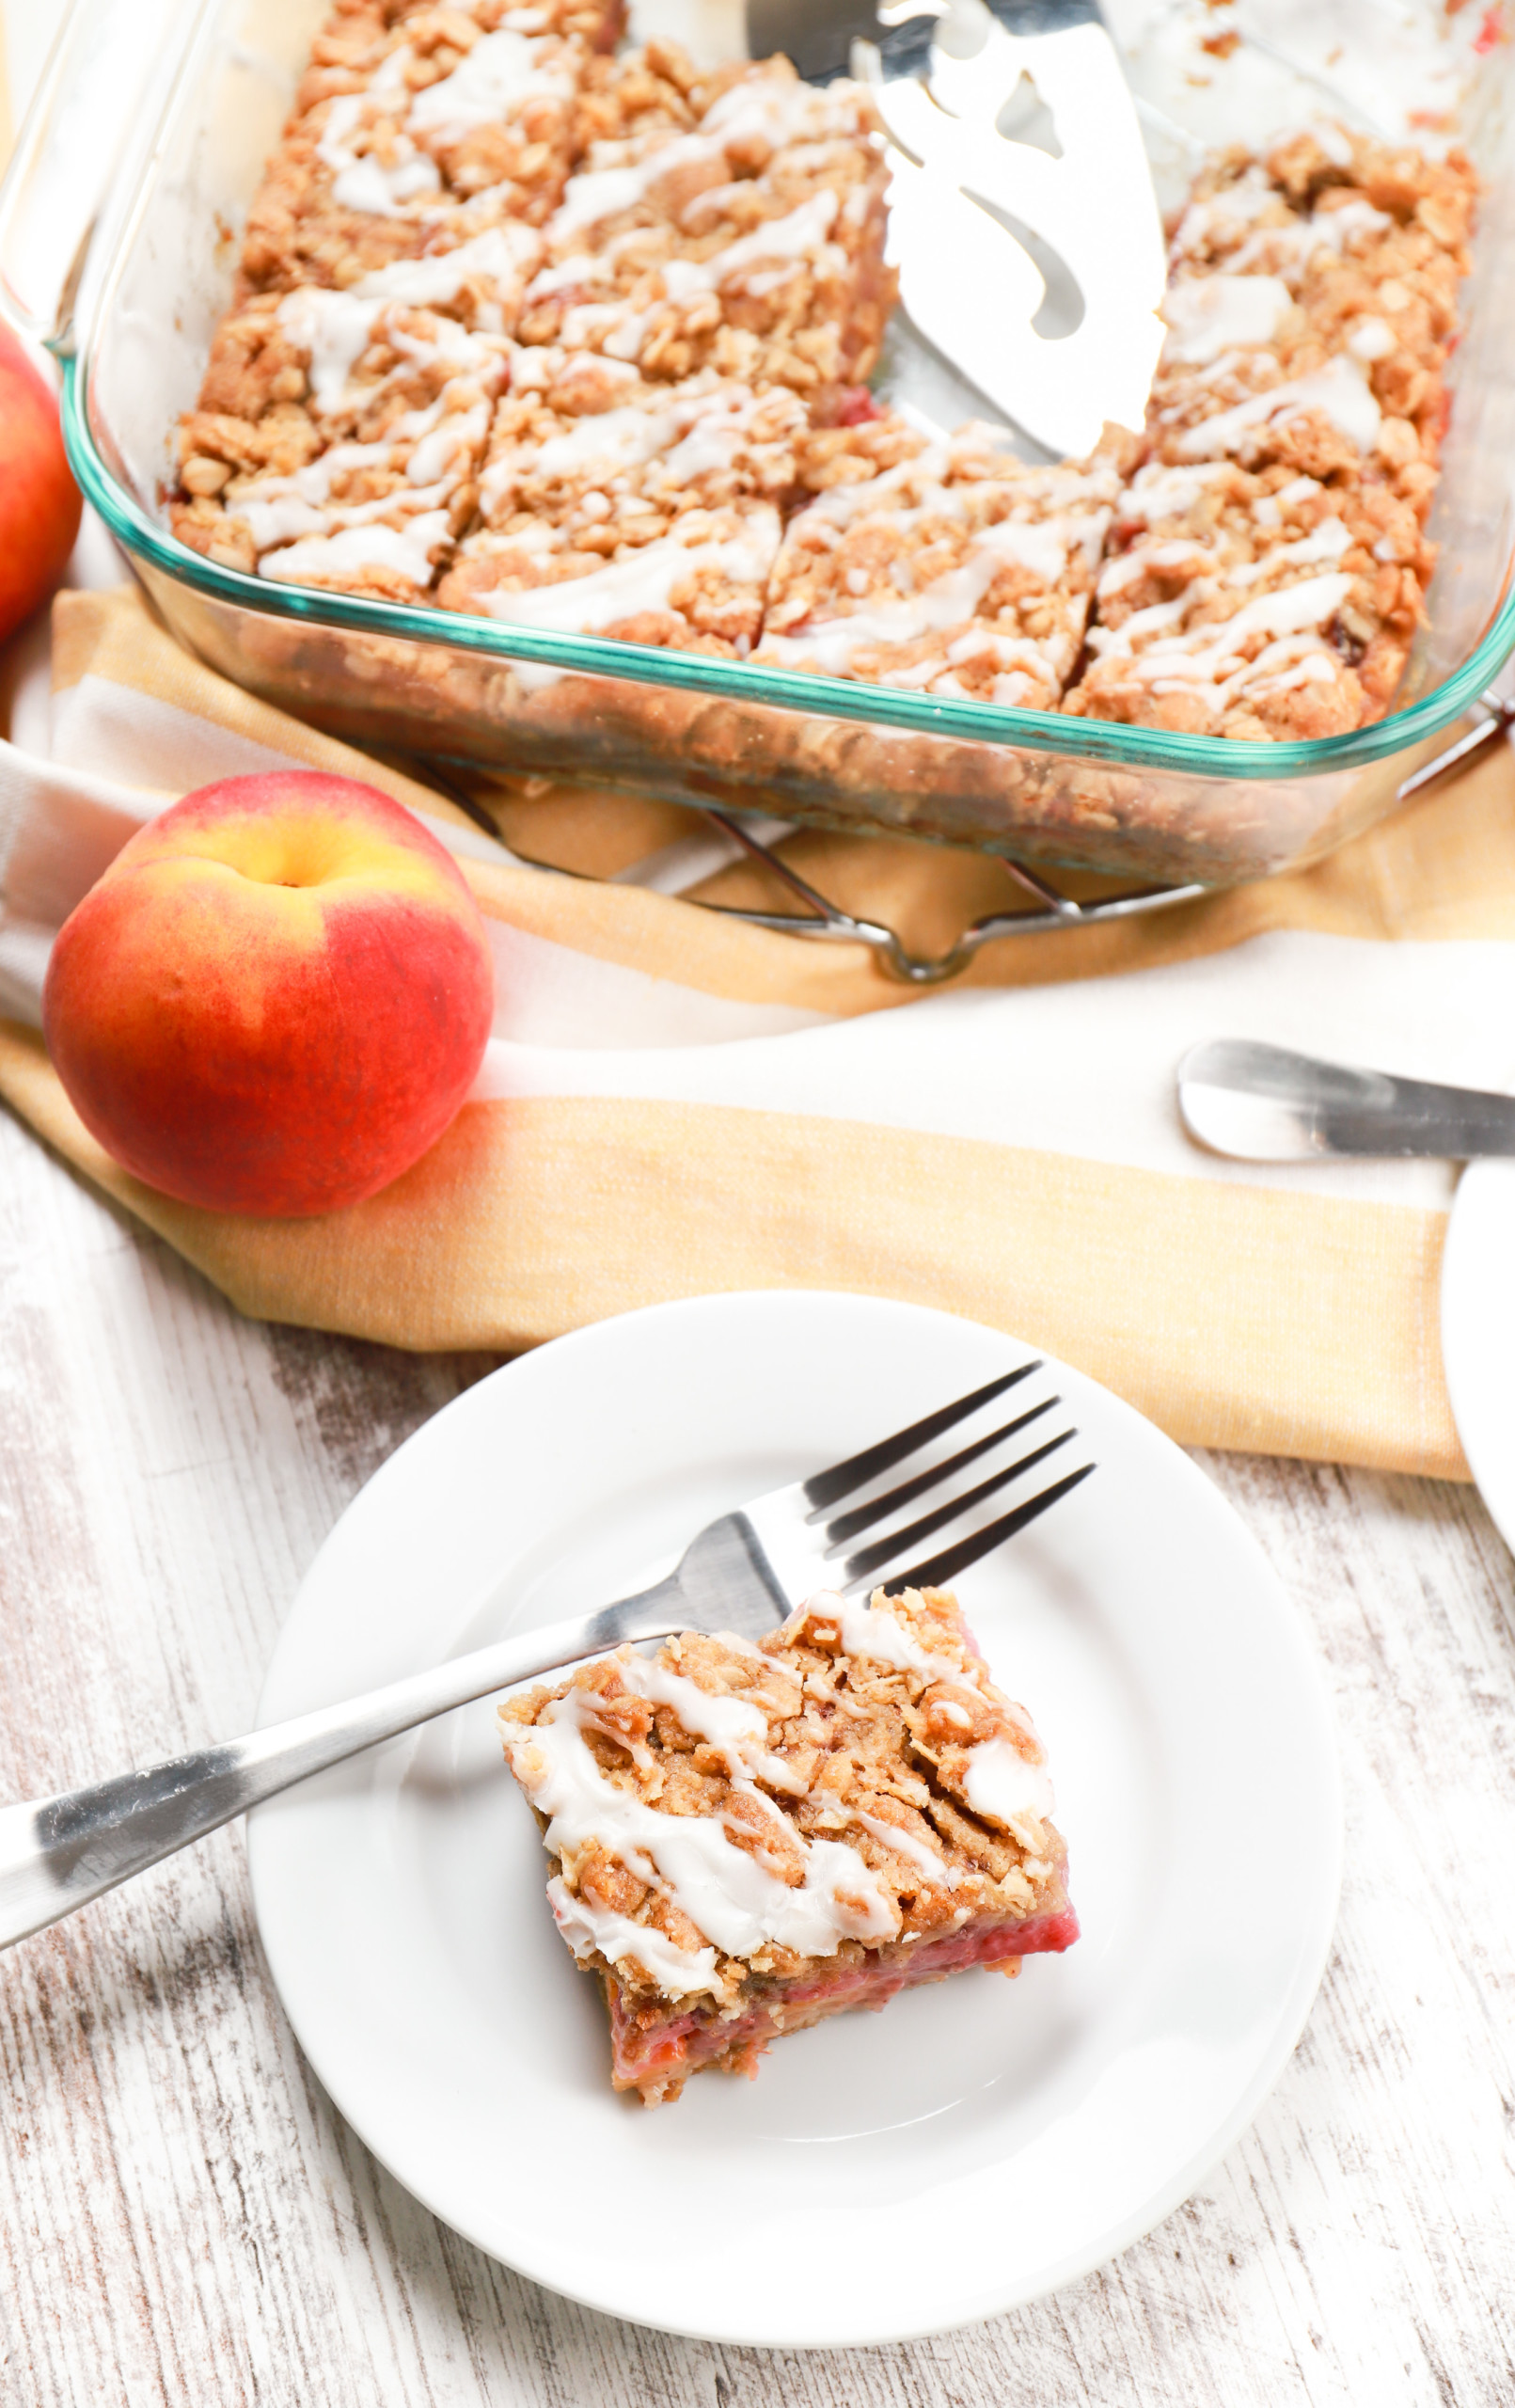 Overhead view of a pan of strawberry peach streusel bars and a small white plate with one streusel bar.